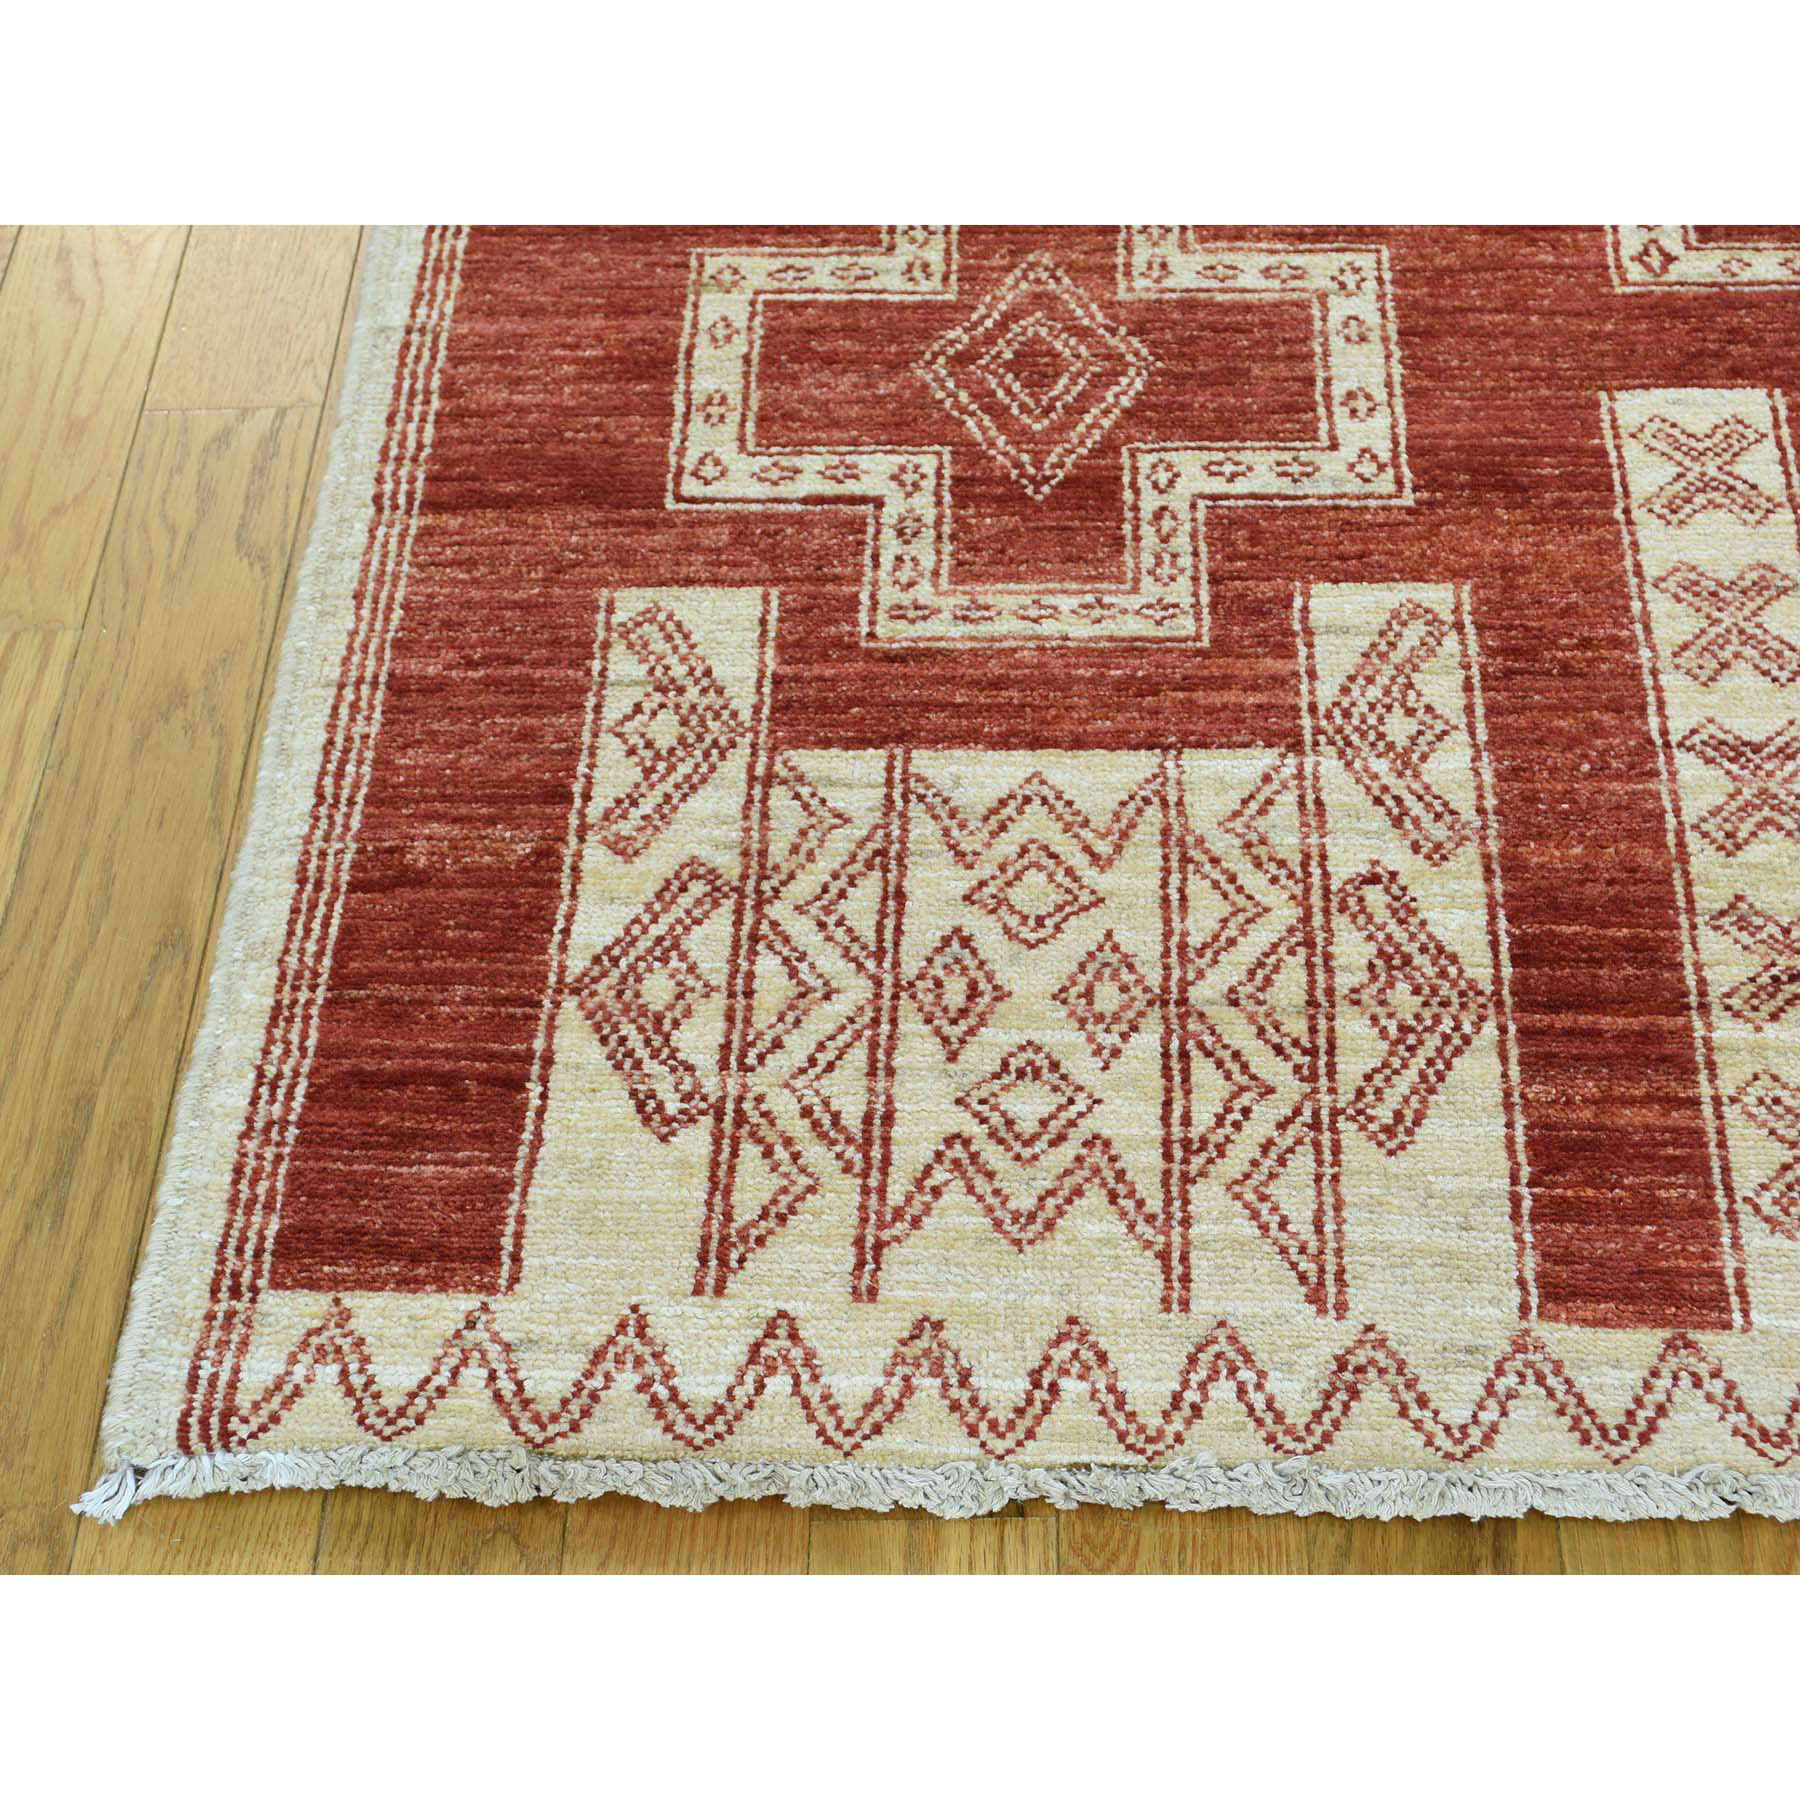 5-10 x8-10  Pure Wool Hand-Knotted Peshawar with Southwestern Motifs Rug 